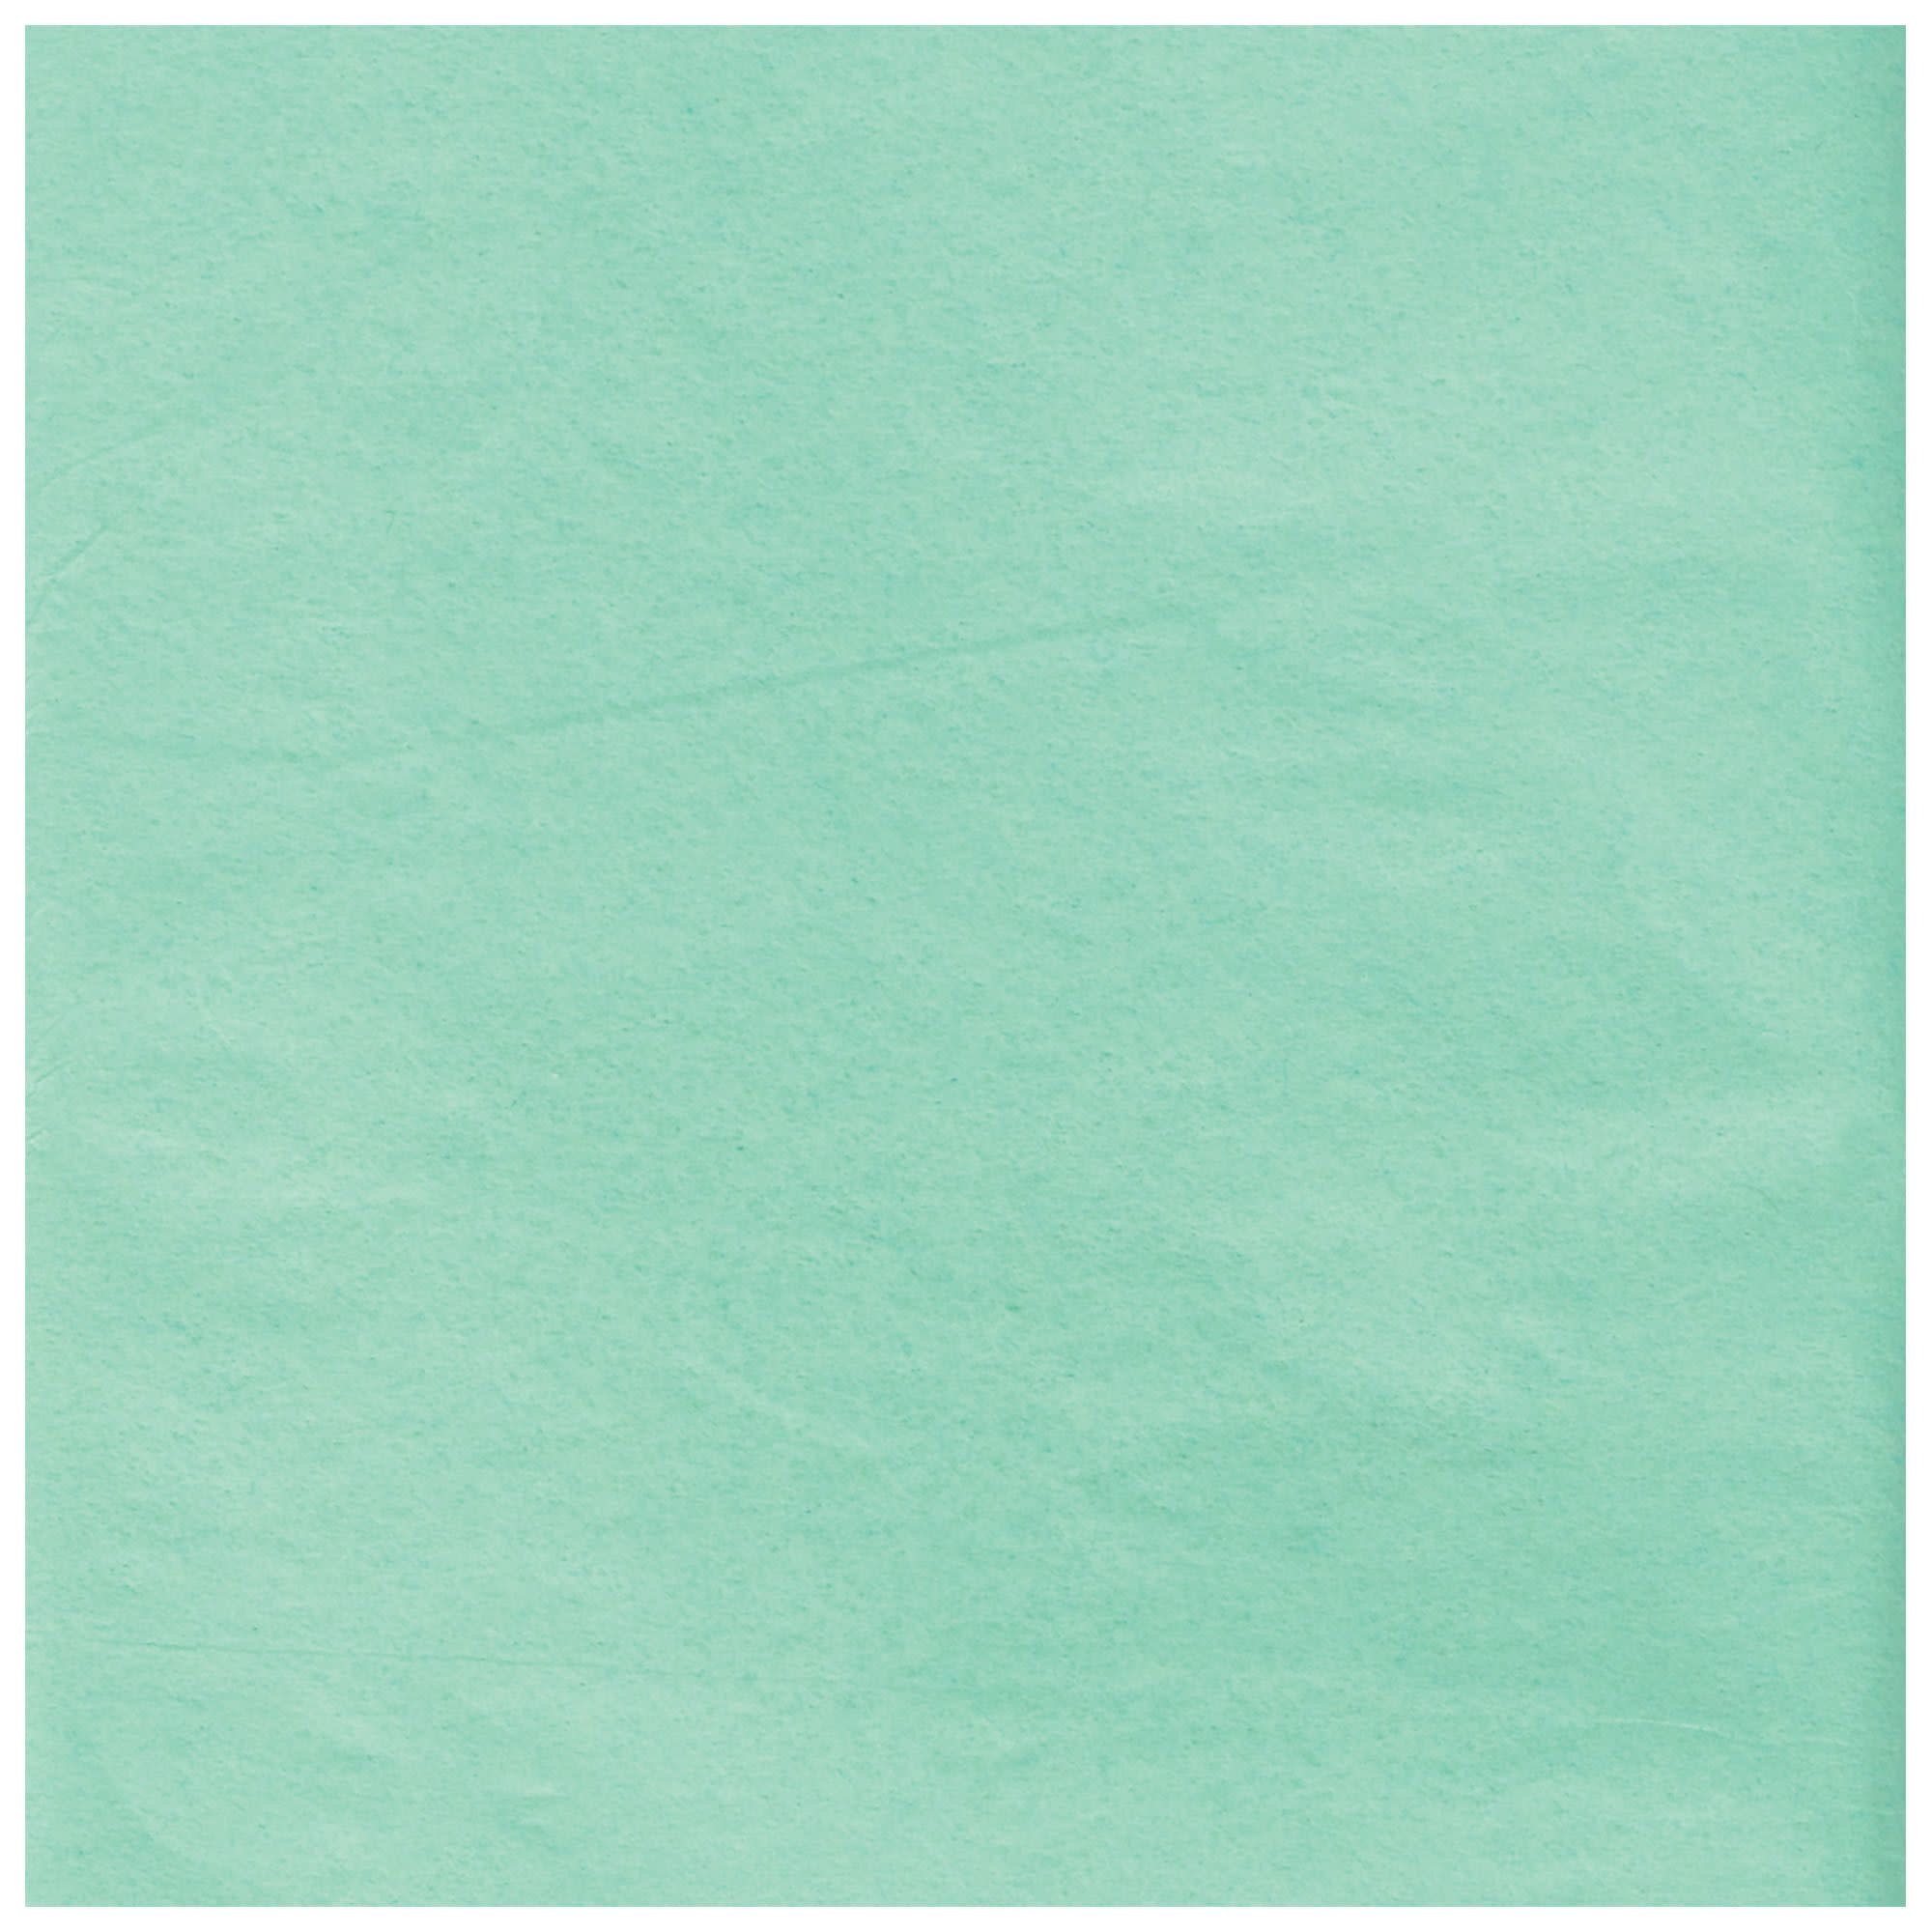 Mint Solid Tissue Paper